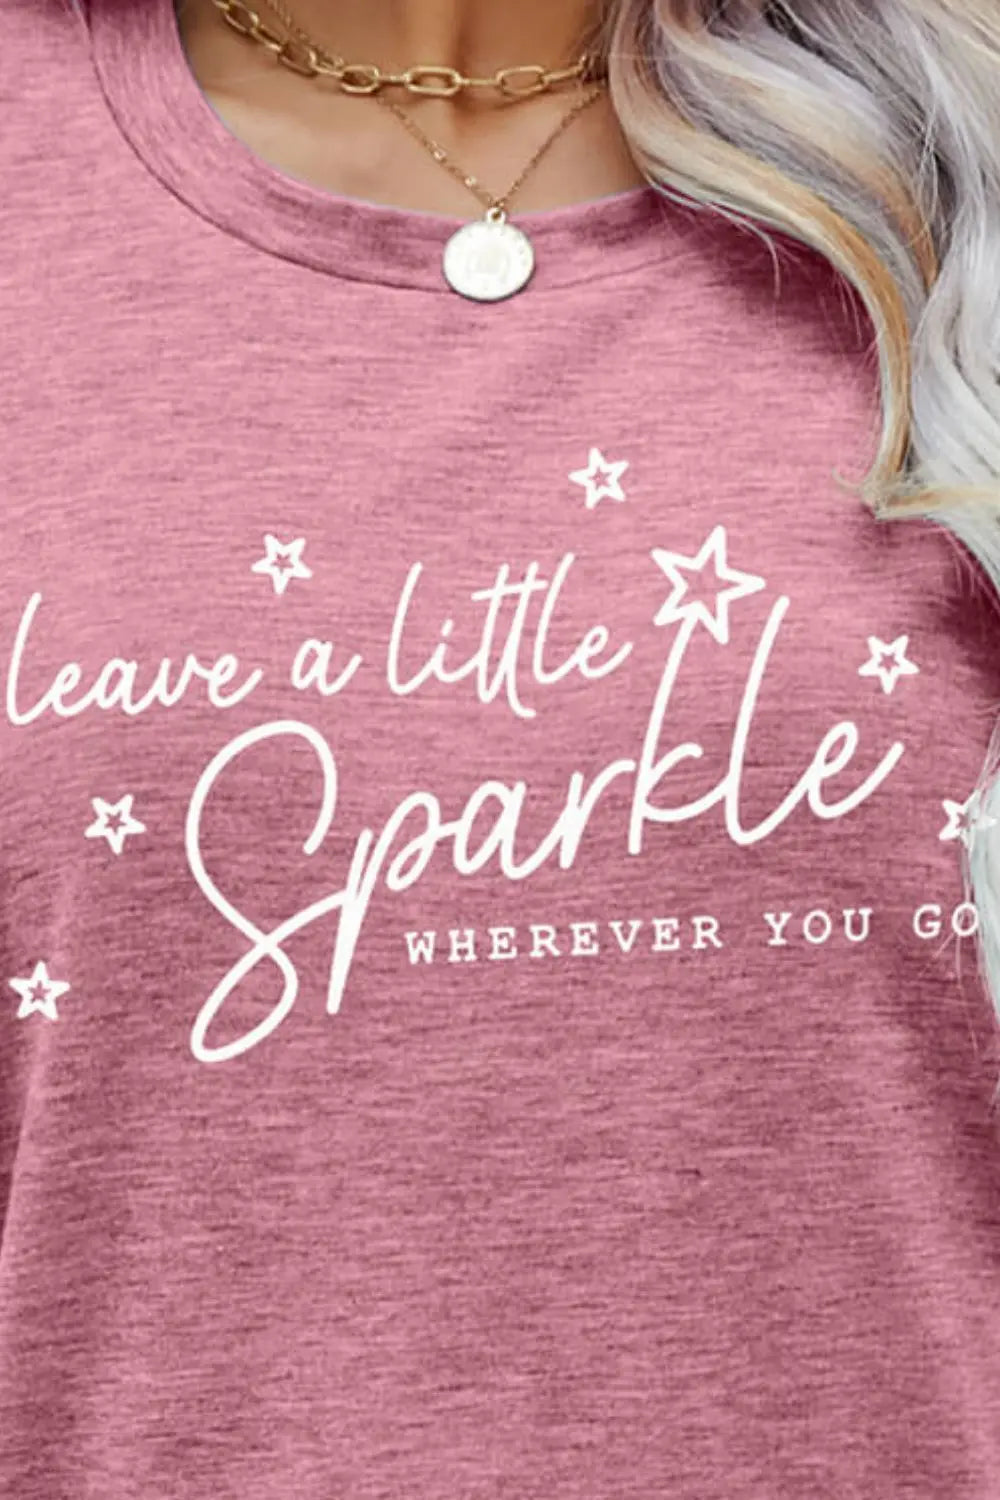 LEAVE A LITTLE SPARKLE WHEREVER YOU GO Tee Shirt - Crystal Vibrations & Healing